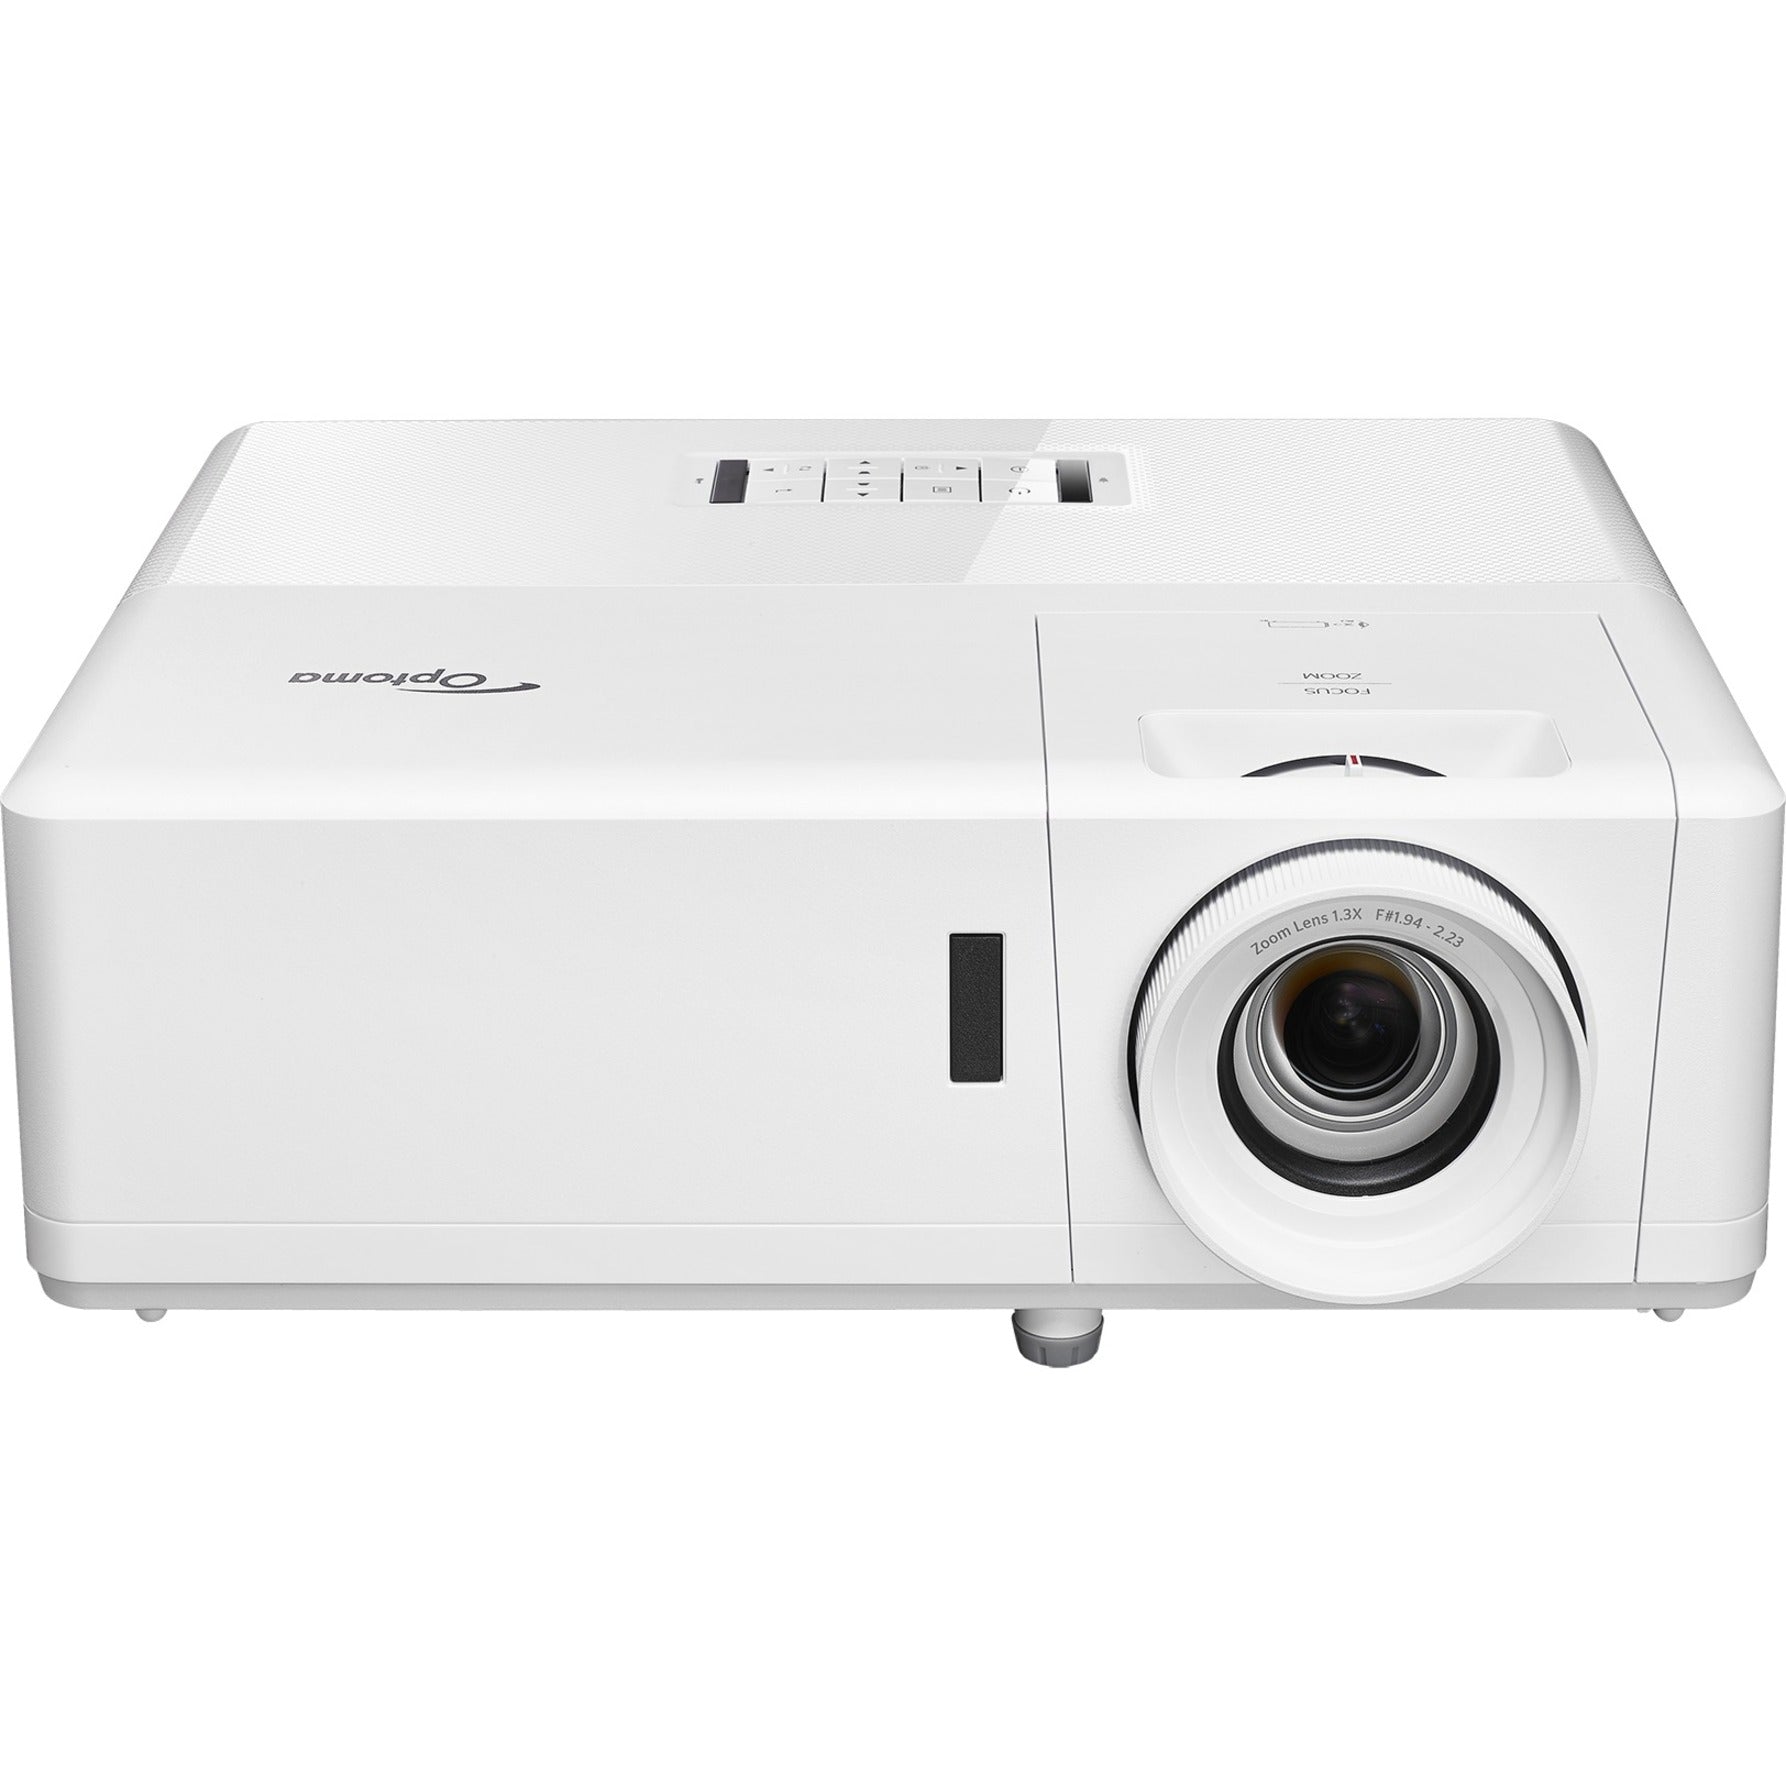 Optoma ZH403 1080p Laser Projector, Full HD, 4000 lm, 3D Ready